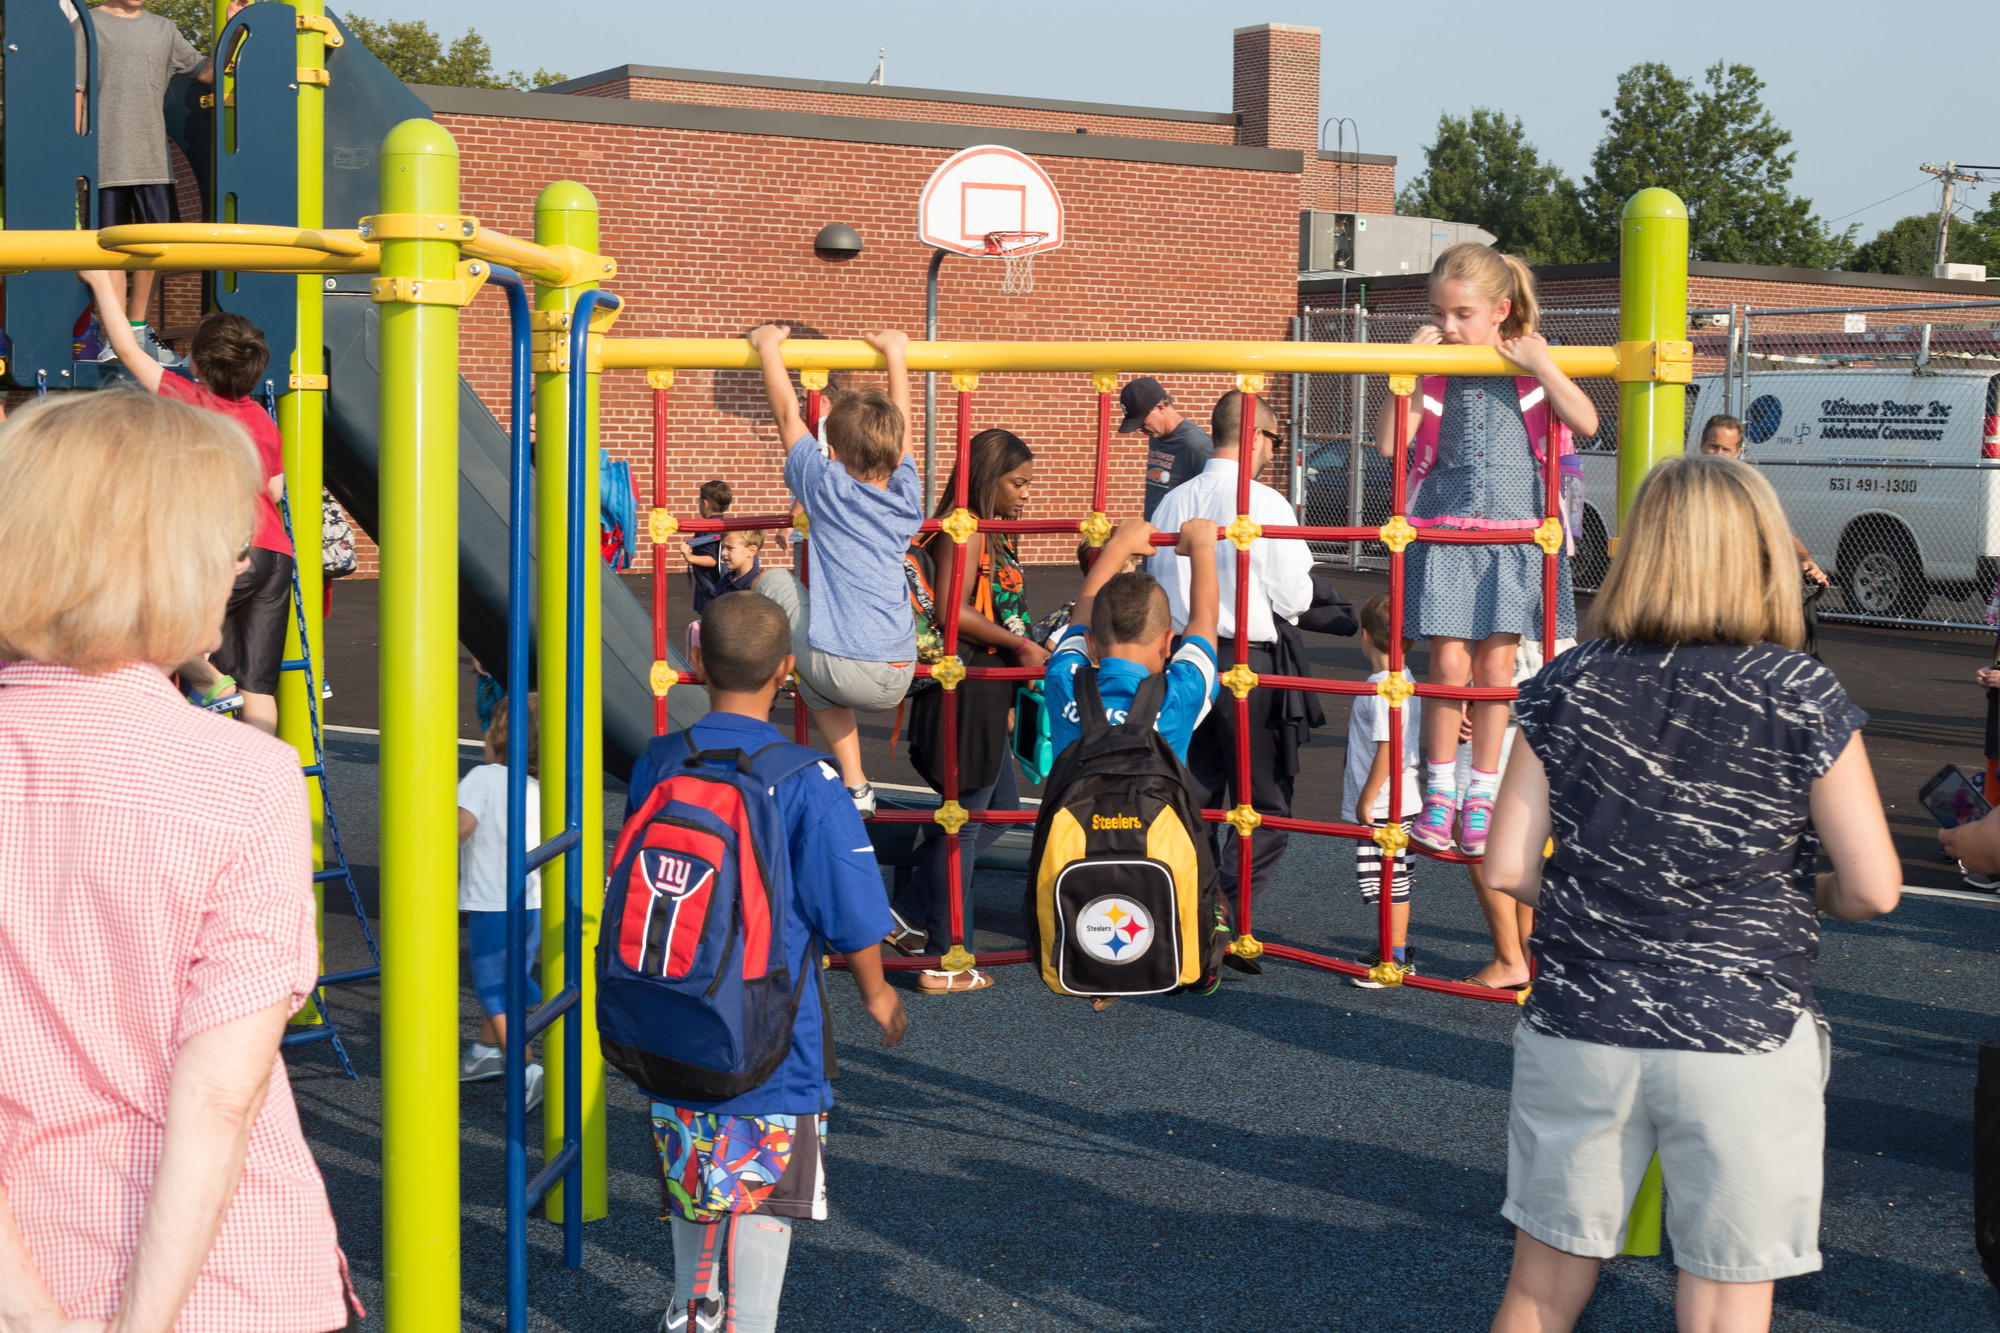 Some students took a moment to try out the school’s new playground equipment before classes started.